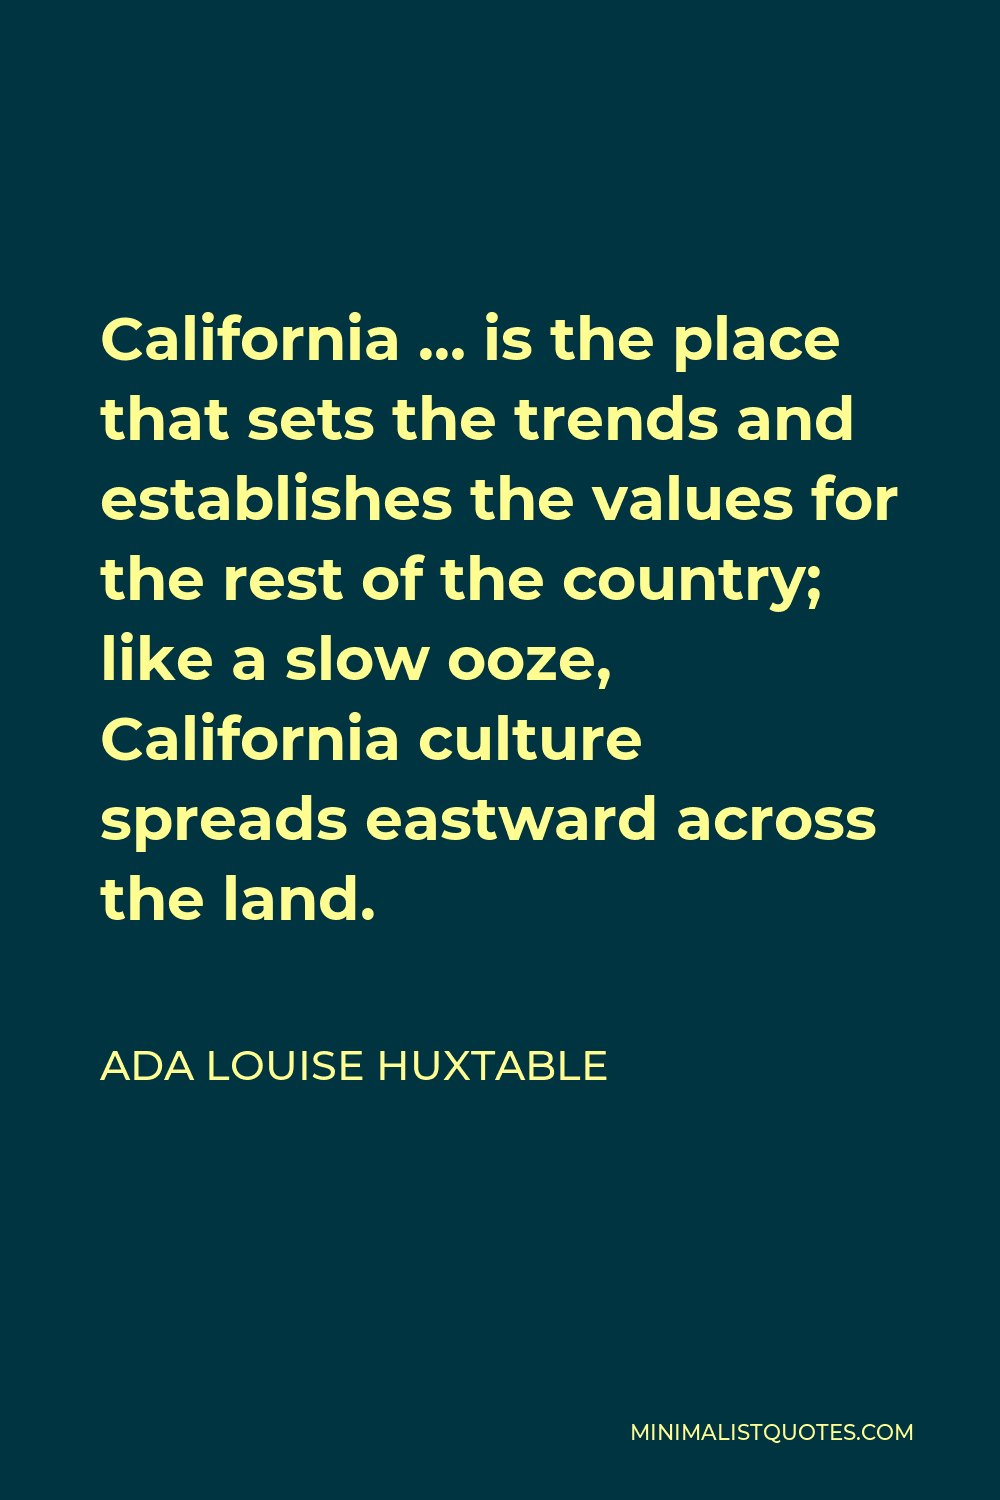 Ada Louise Huxtable Quote - California … is the place that sets the trends and establishes the values for the rest of the country; like a slow ooze, California culture spreads eastward across the land.